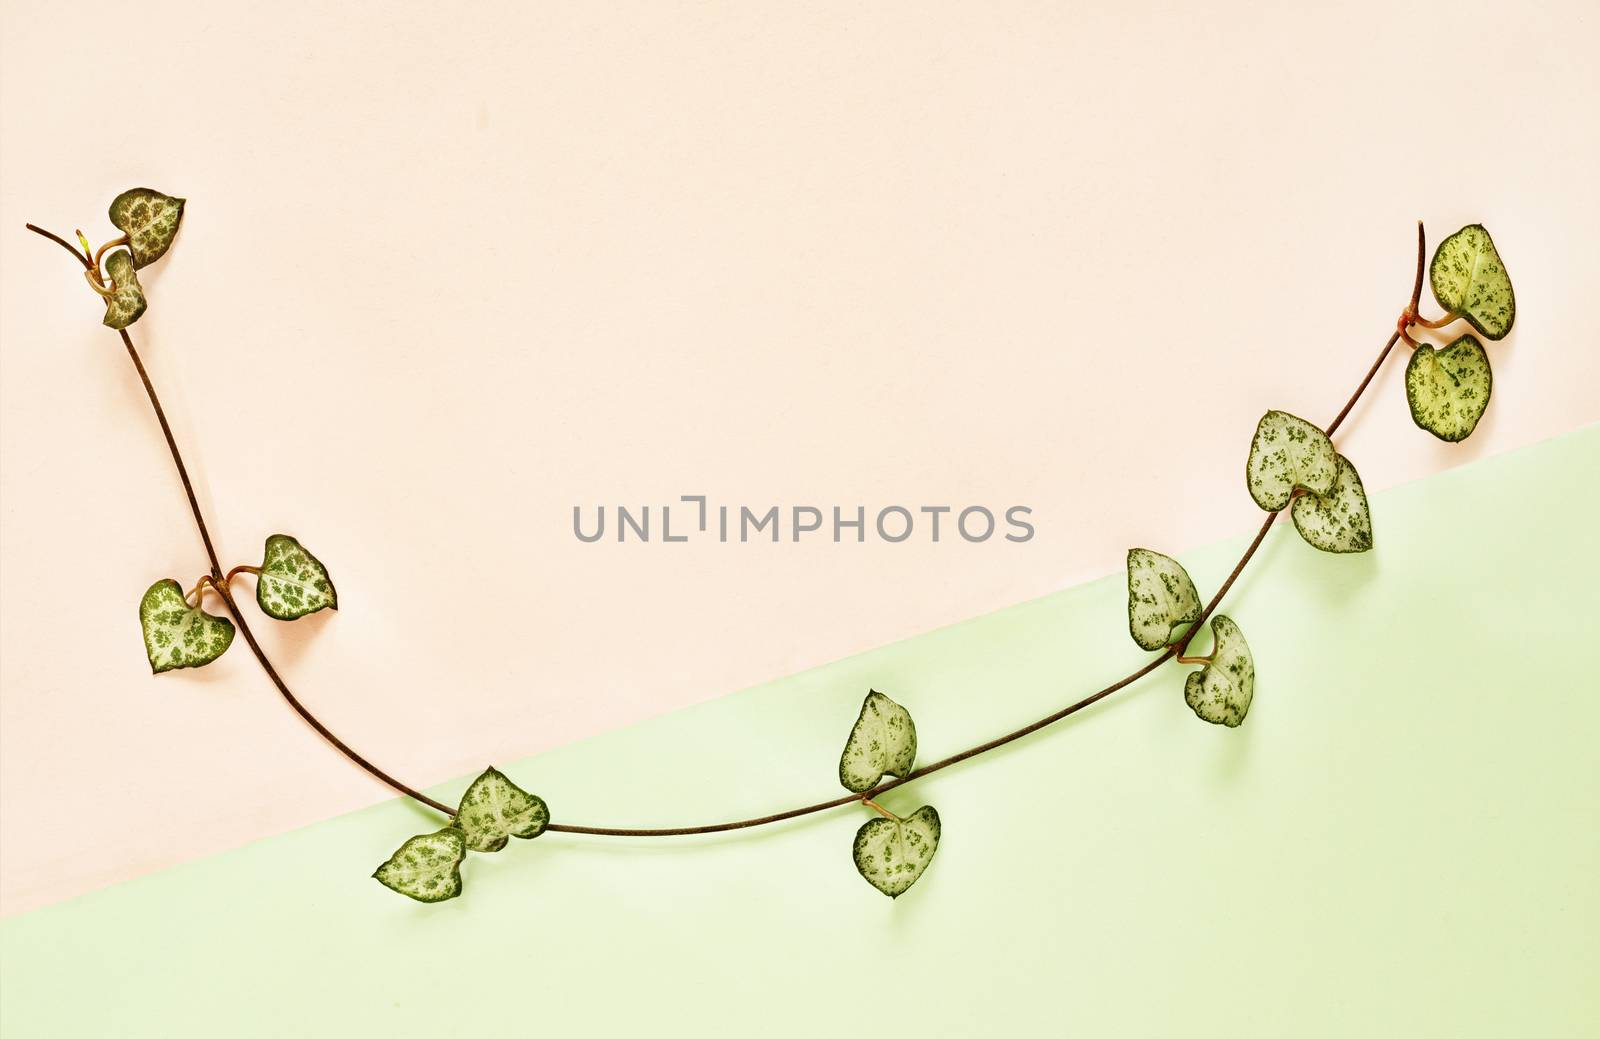 Flowering plant of ceropegia woodii also called chain of hearts or string of hearts on pink -green background, evergreen succulent plant with leaves shaped like heart